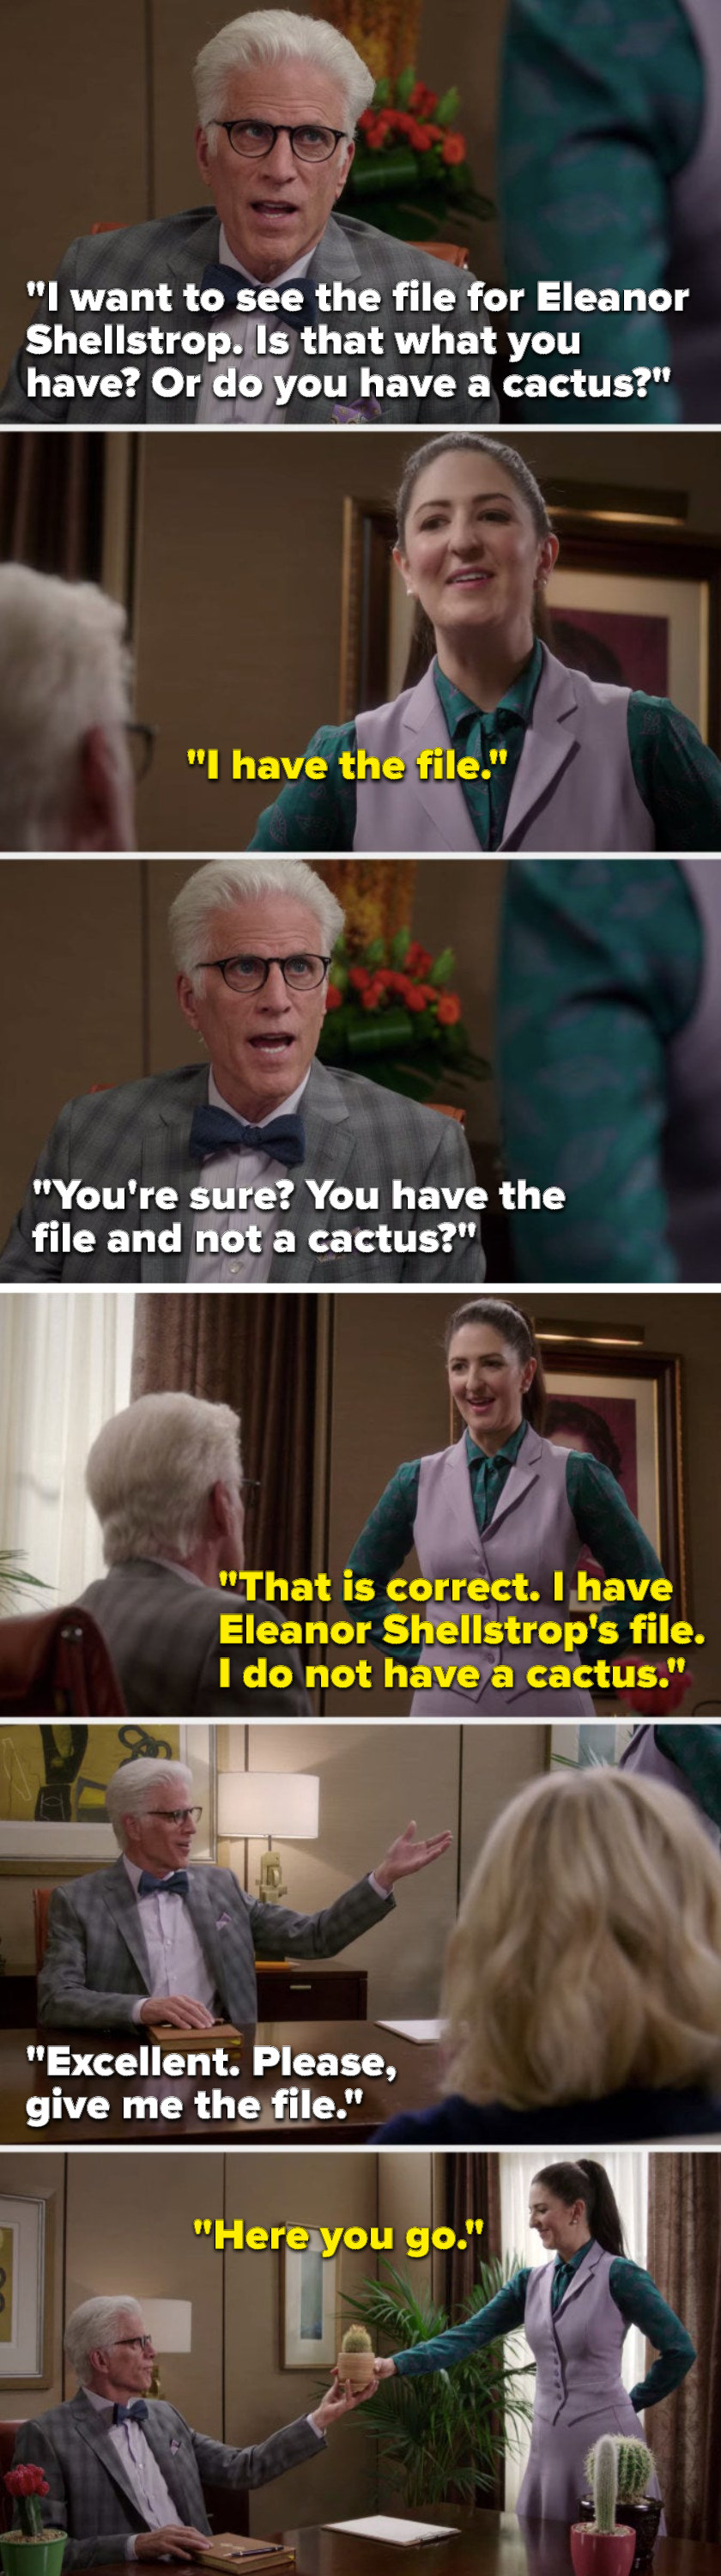 Michael says, &quot;I want to see Eleanor Shellstrop&#x27;s file, is that what you have or do you have a cactus&quot; Janet says, &quot;I have Eleanor Shellstrop&#x27;s file, I do not have a cactus,&quot; Michael says, &quot;Excellent, please, give me the file&quot; and Janet hands him a cactus